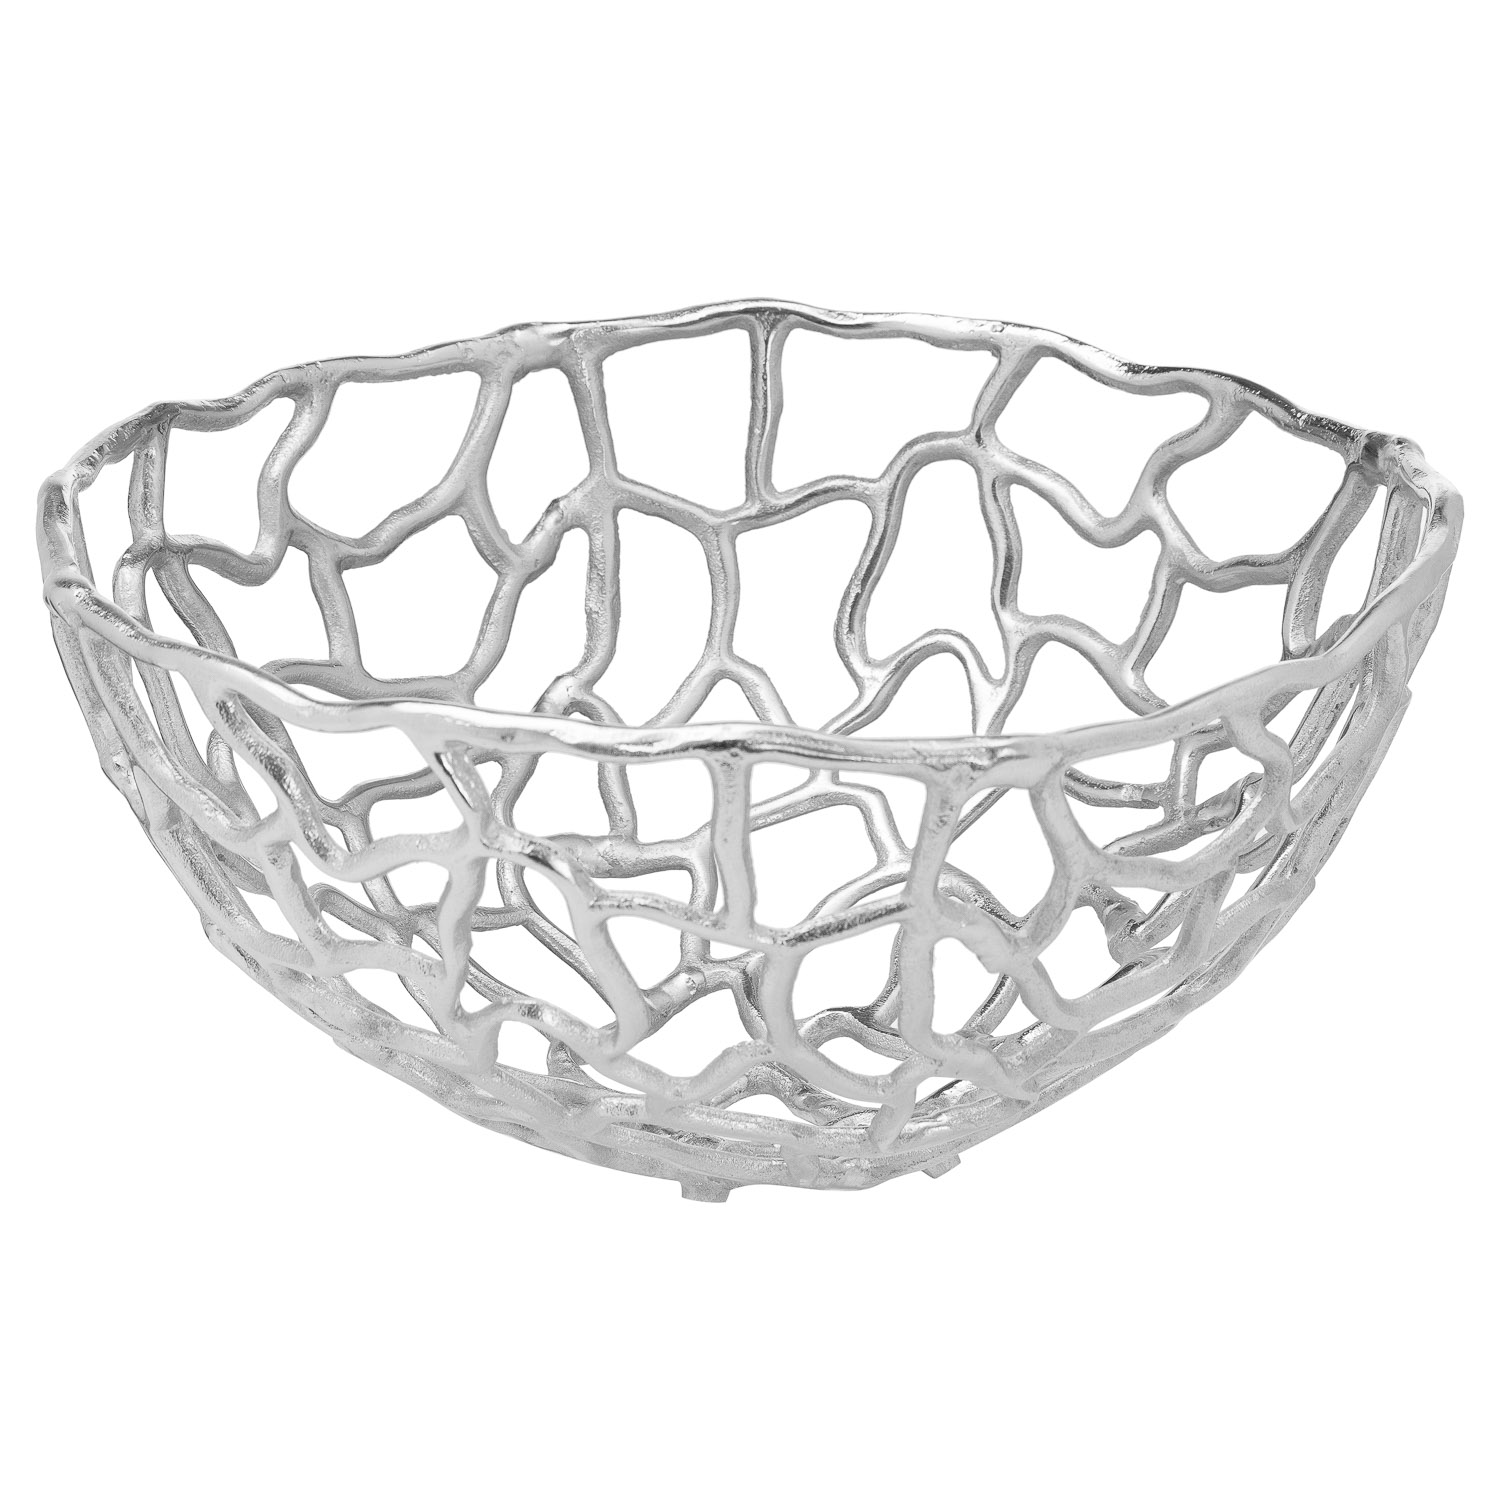 Ohlson Silver Perforated Coral inspired Bowl Large - Image 1